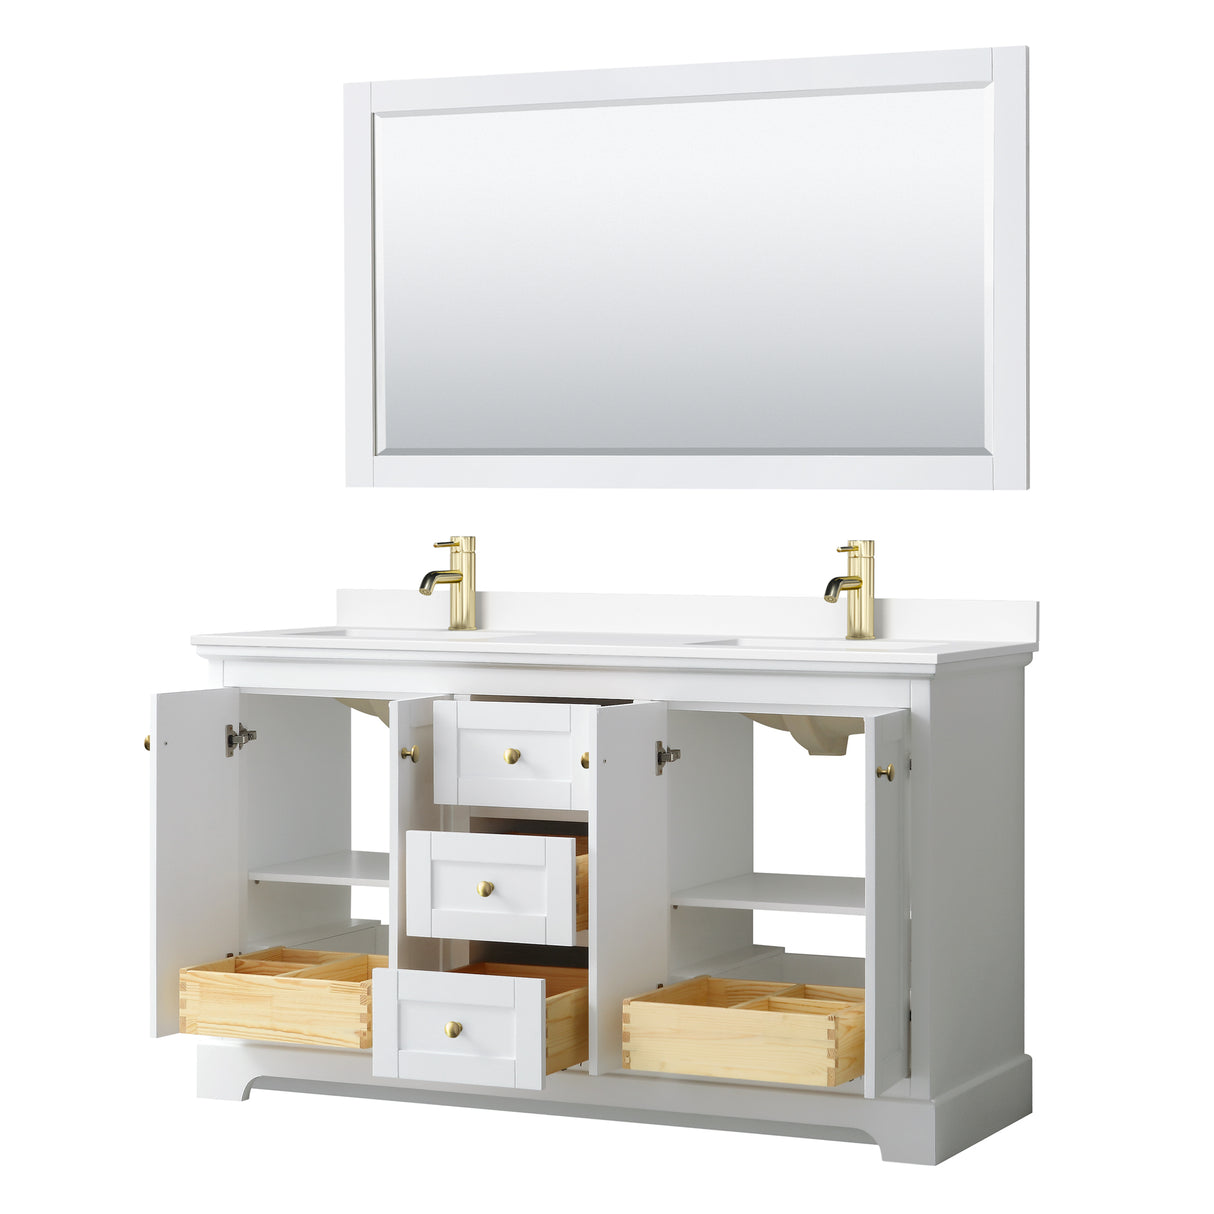 Avery 60 Inch Double Bathroom Vanity in White White Cultured Marble Countertop Undermount Square Sinks 58 Inch Mirror Brushed Gold Trim